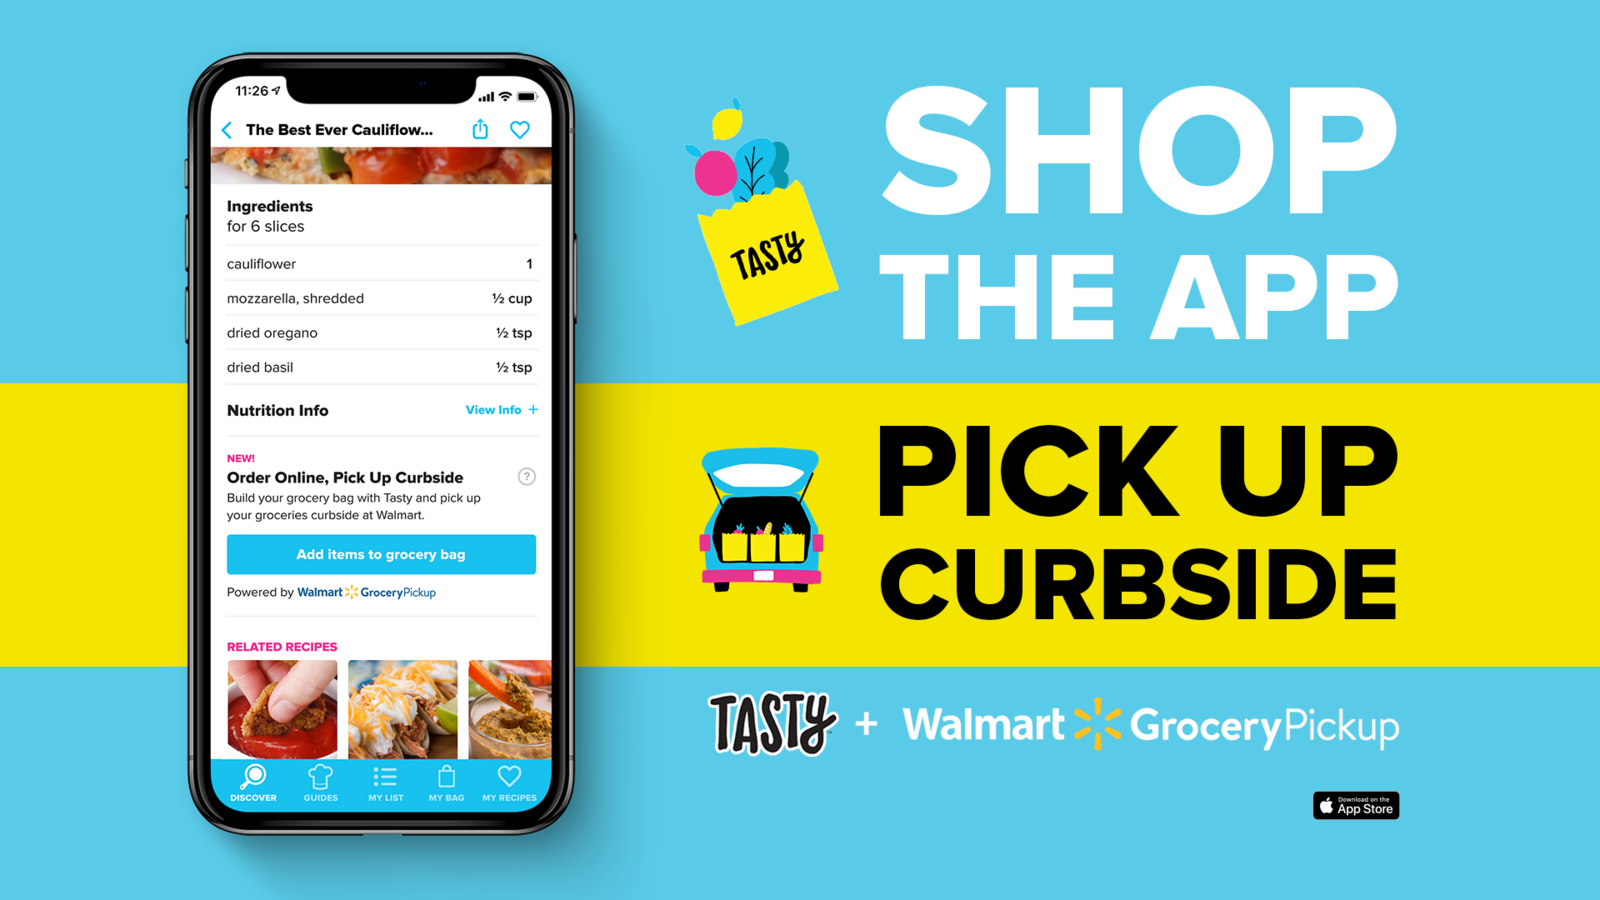 Advertisement for Tasty and Walmart Grocery Pickup App displaying phone with recipe and curbside pickup option